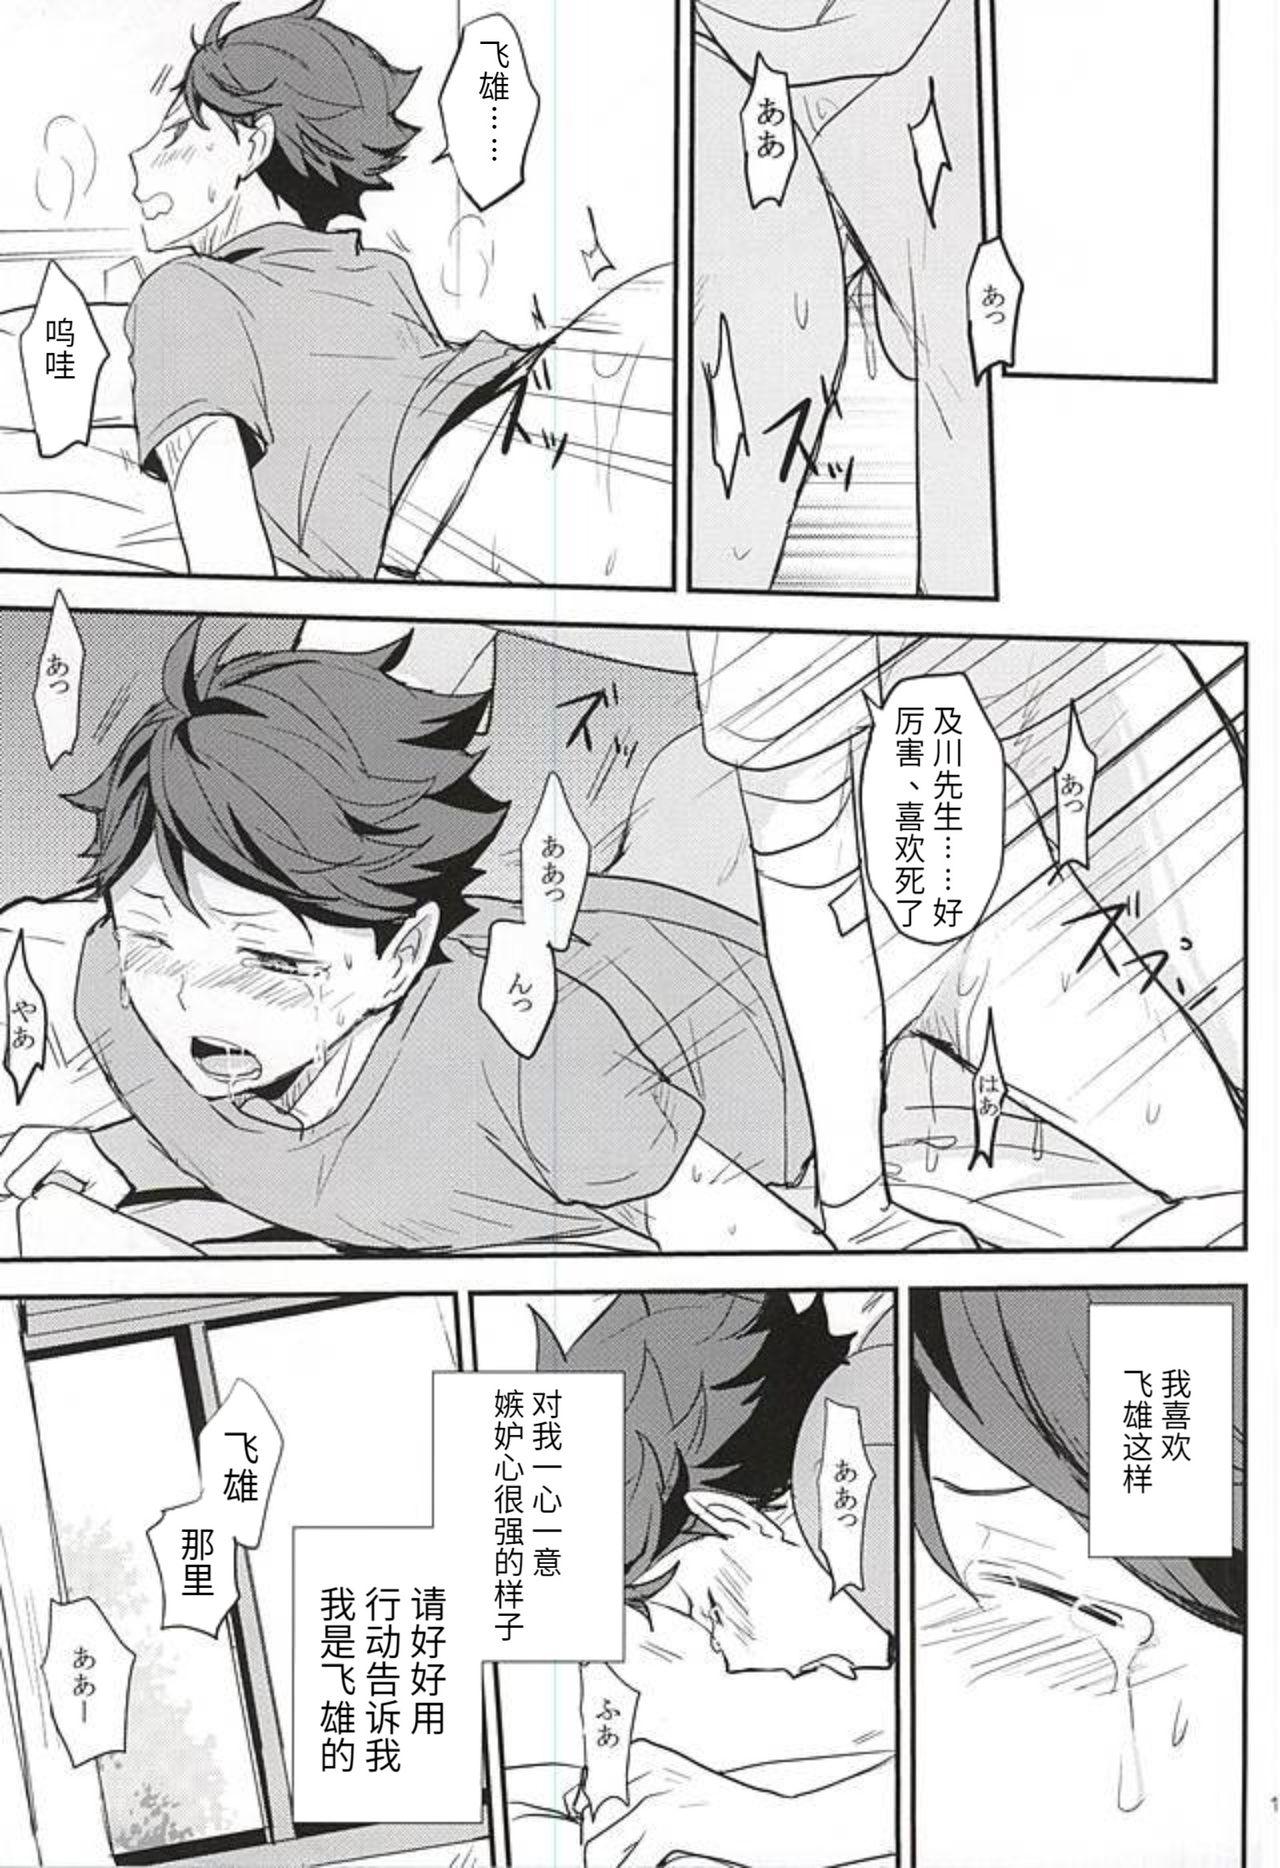 Step 此名为爱 THIS THING CALLED LOVE - Haikyuu Stretching - Page 17